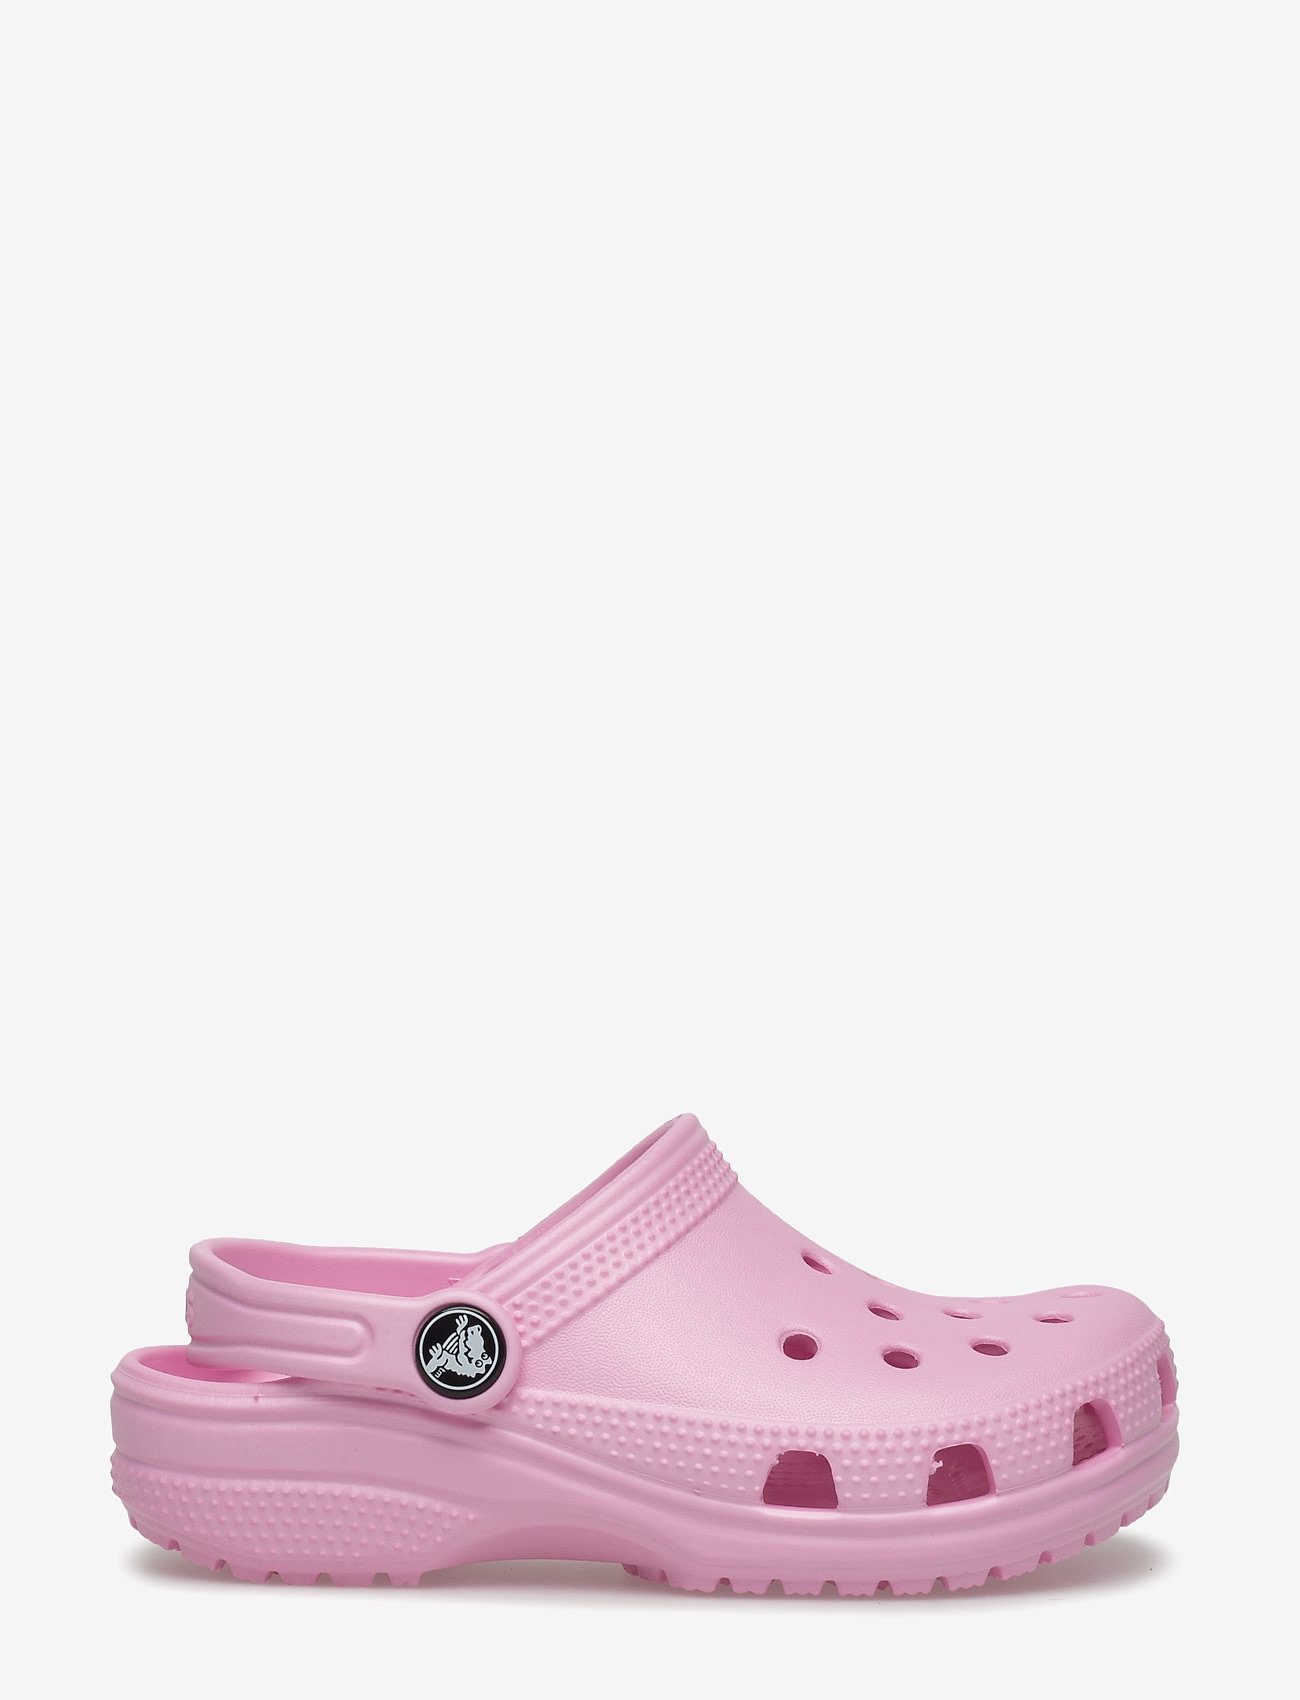 crocs next day delivery